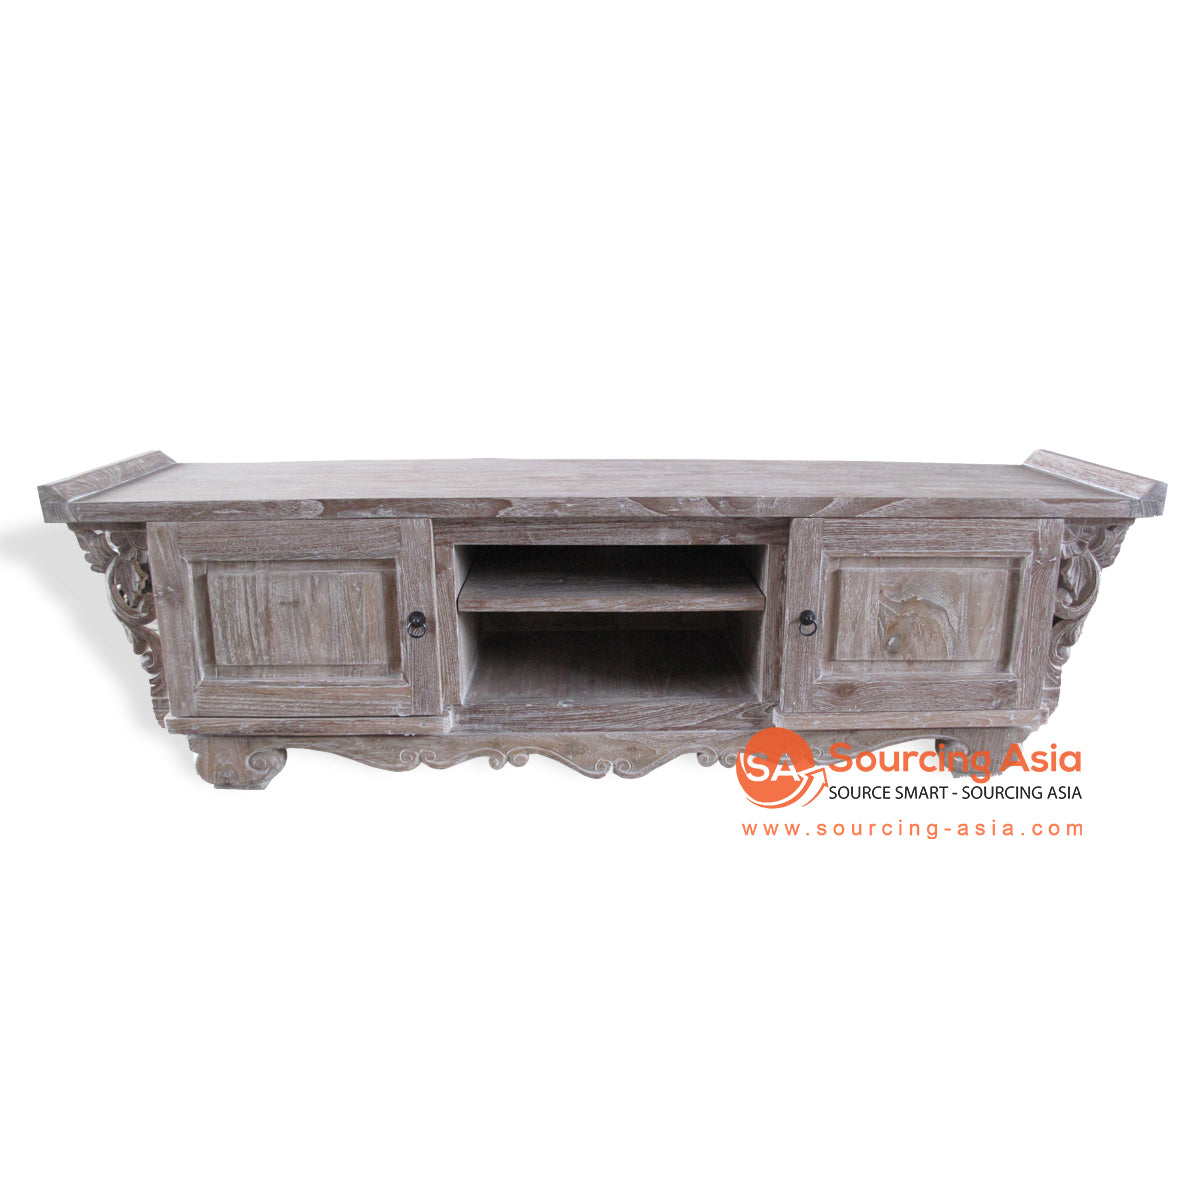 KYT80003-SP RECYCLED TEAK WOOD CARVED ENTERTAINMENT UNIT